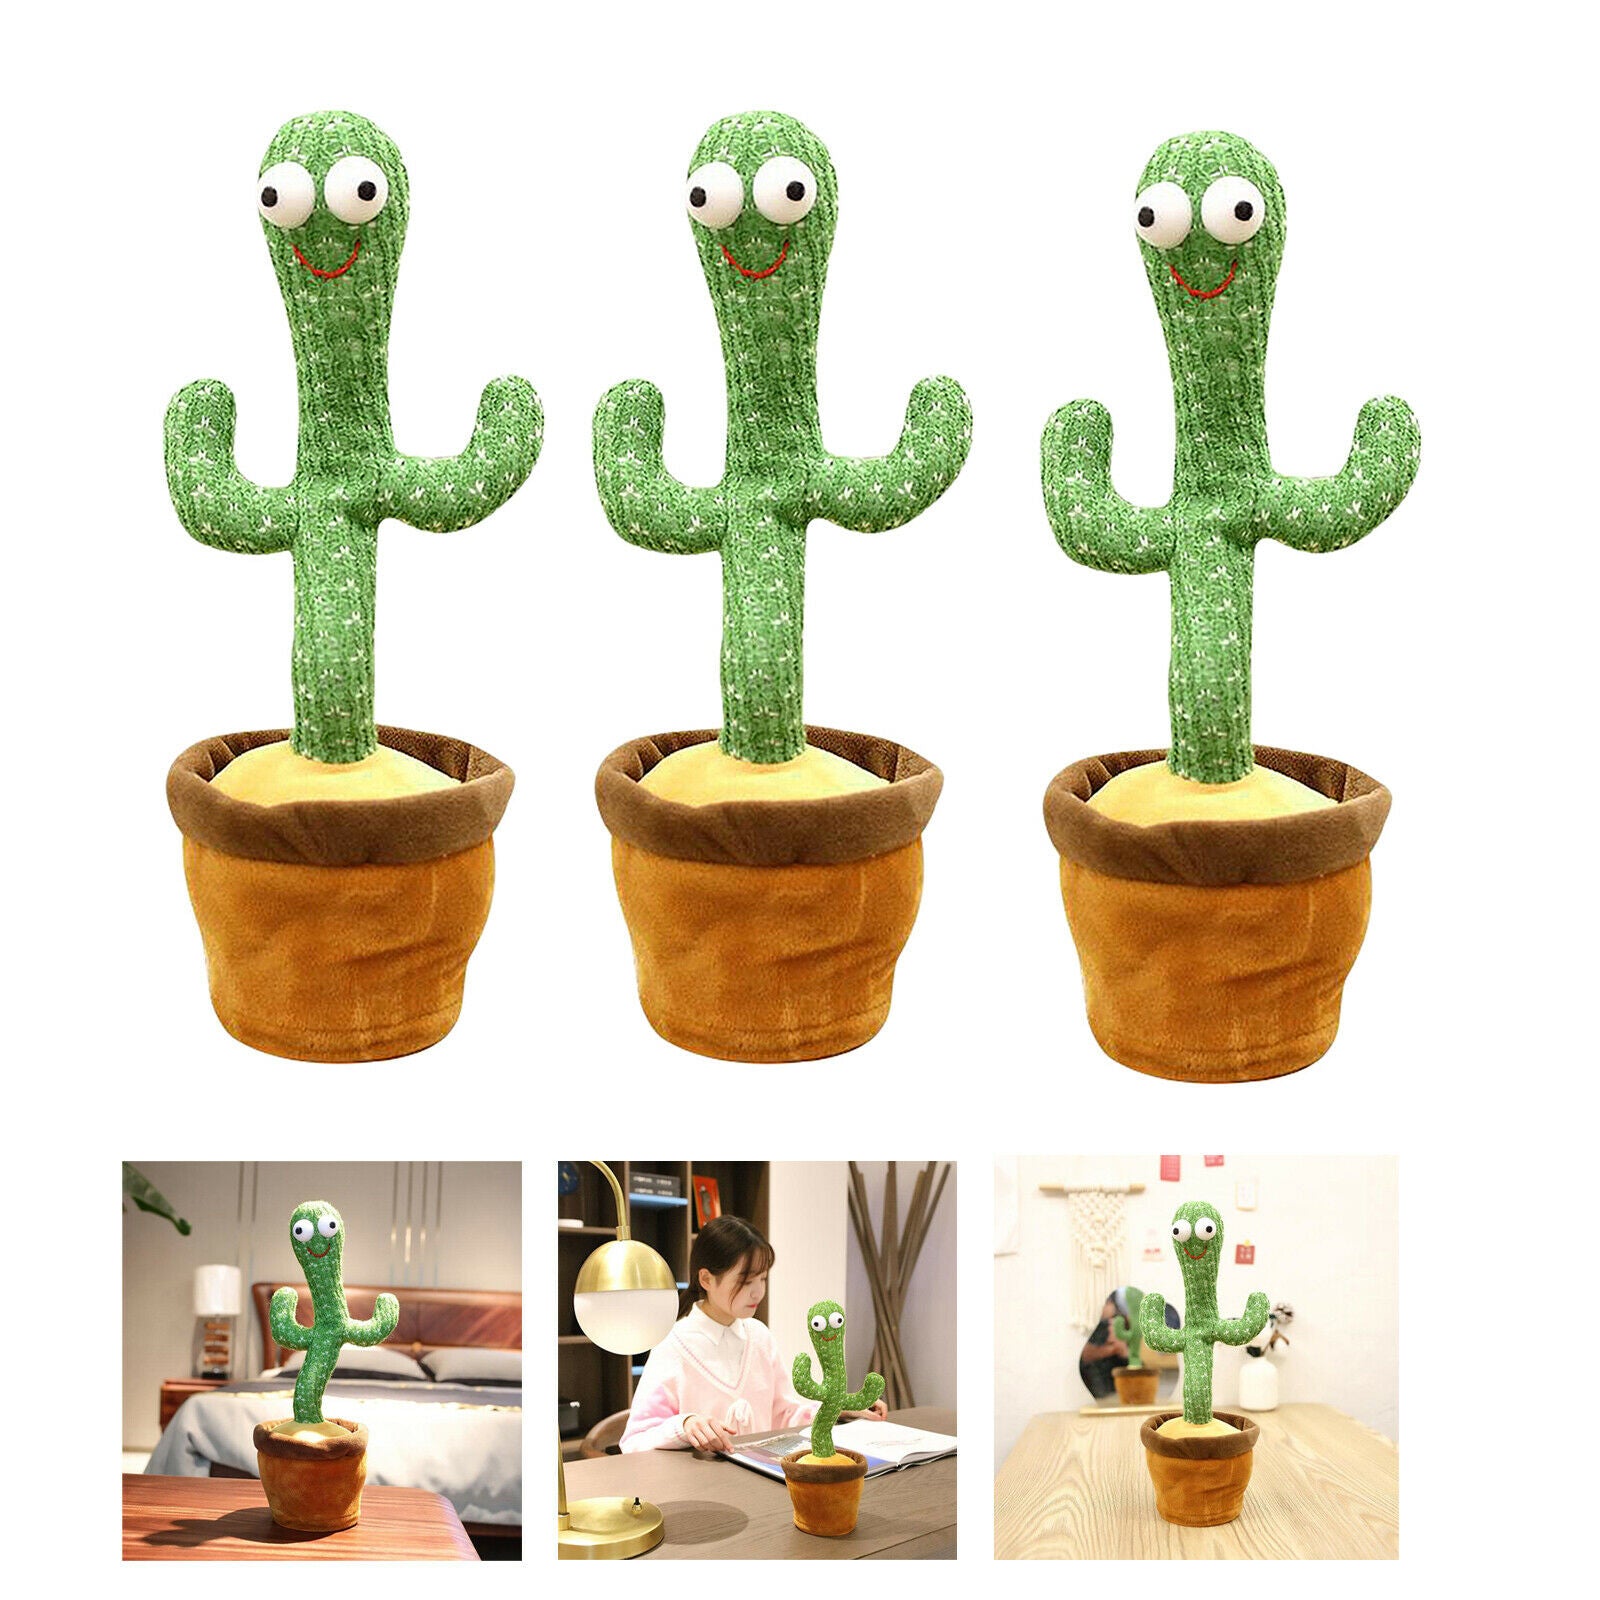 3x   Plush Toys, Electronic Swing Cactus with Singing and Dancing